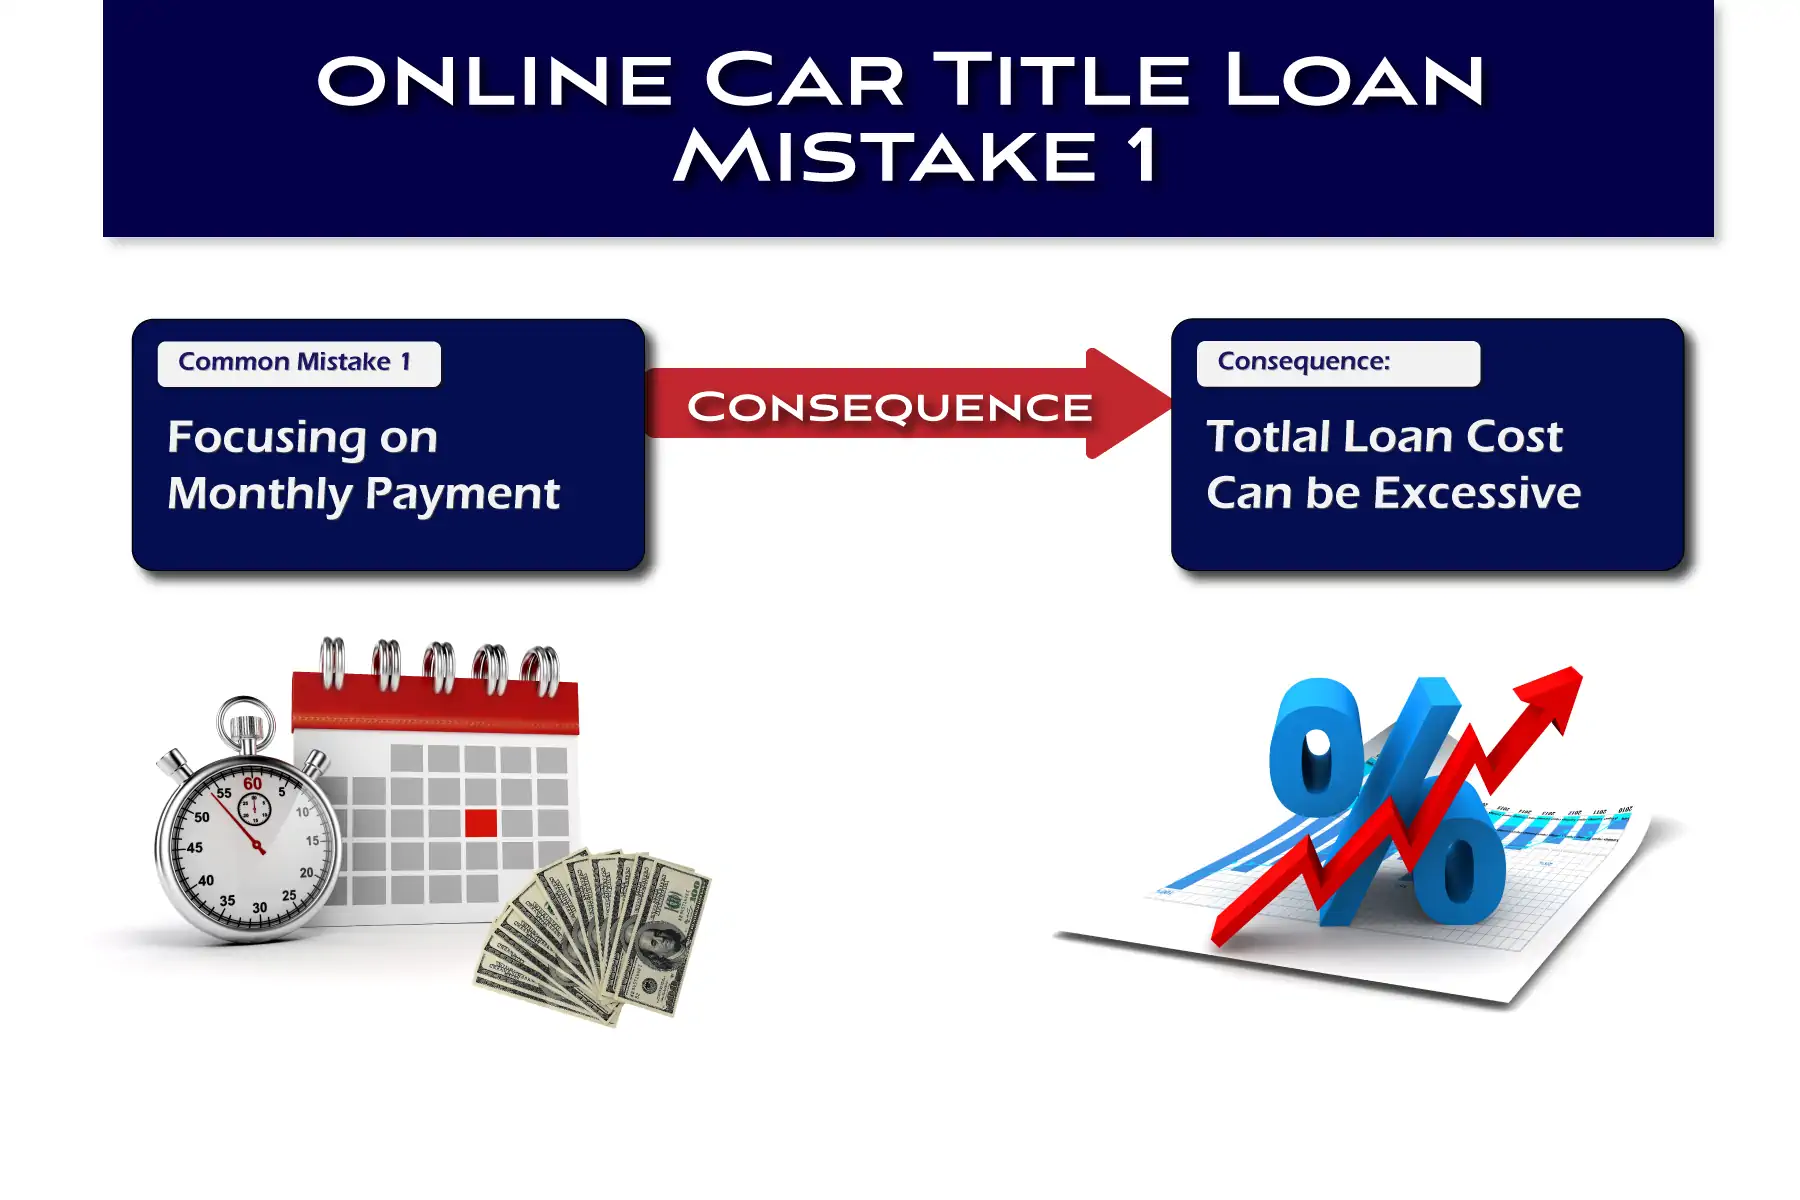 Online car title loan mistake 1 - focusing on the monthly payment